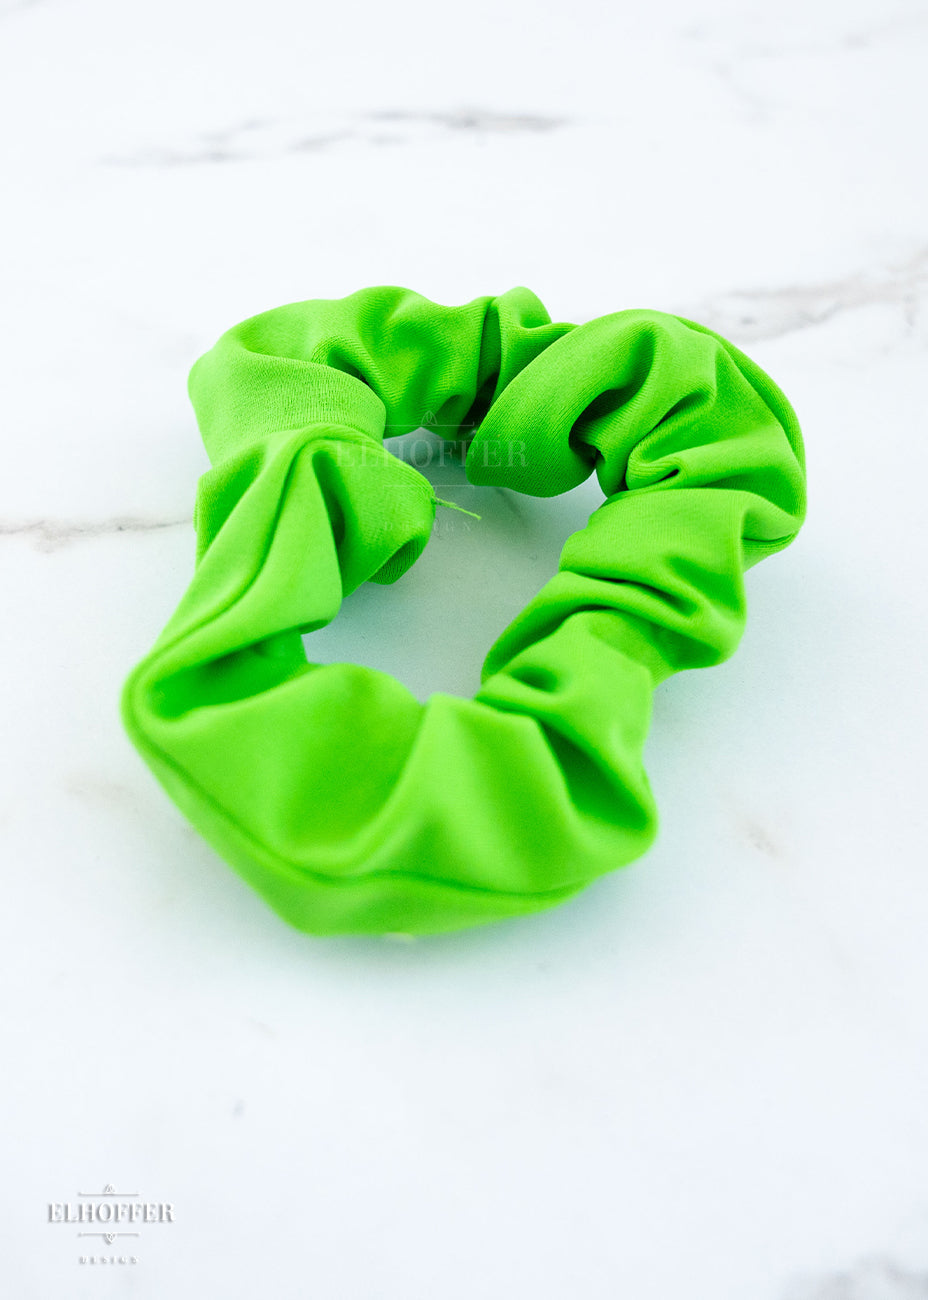 A bright green scrunchie on a white marbled background.